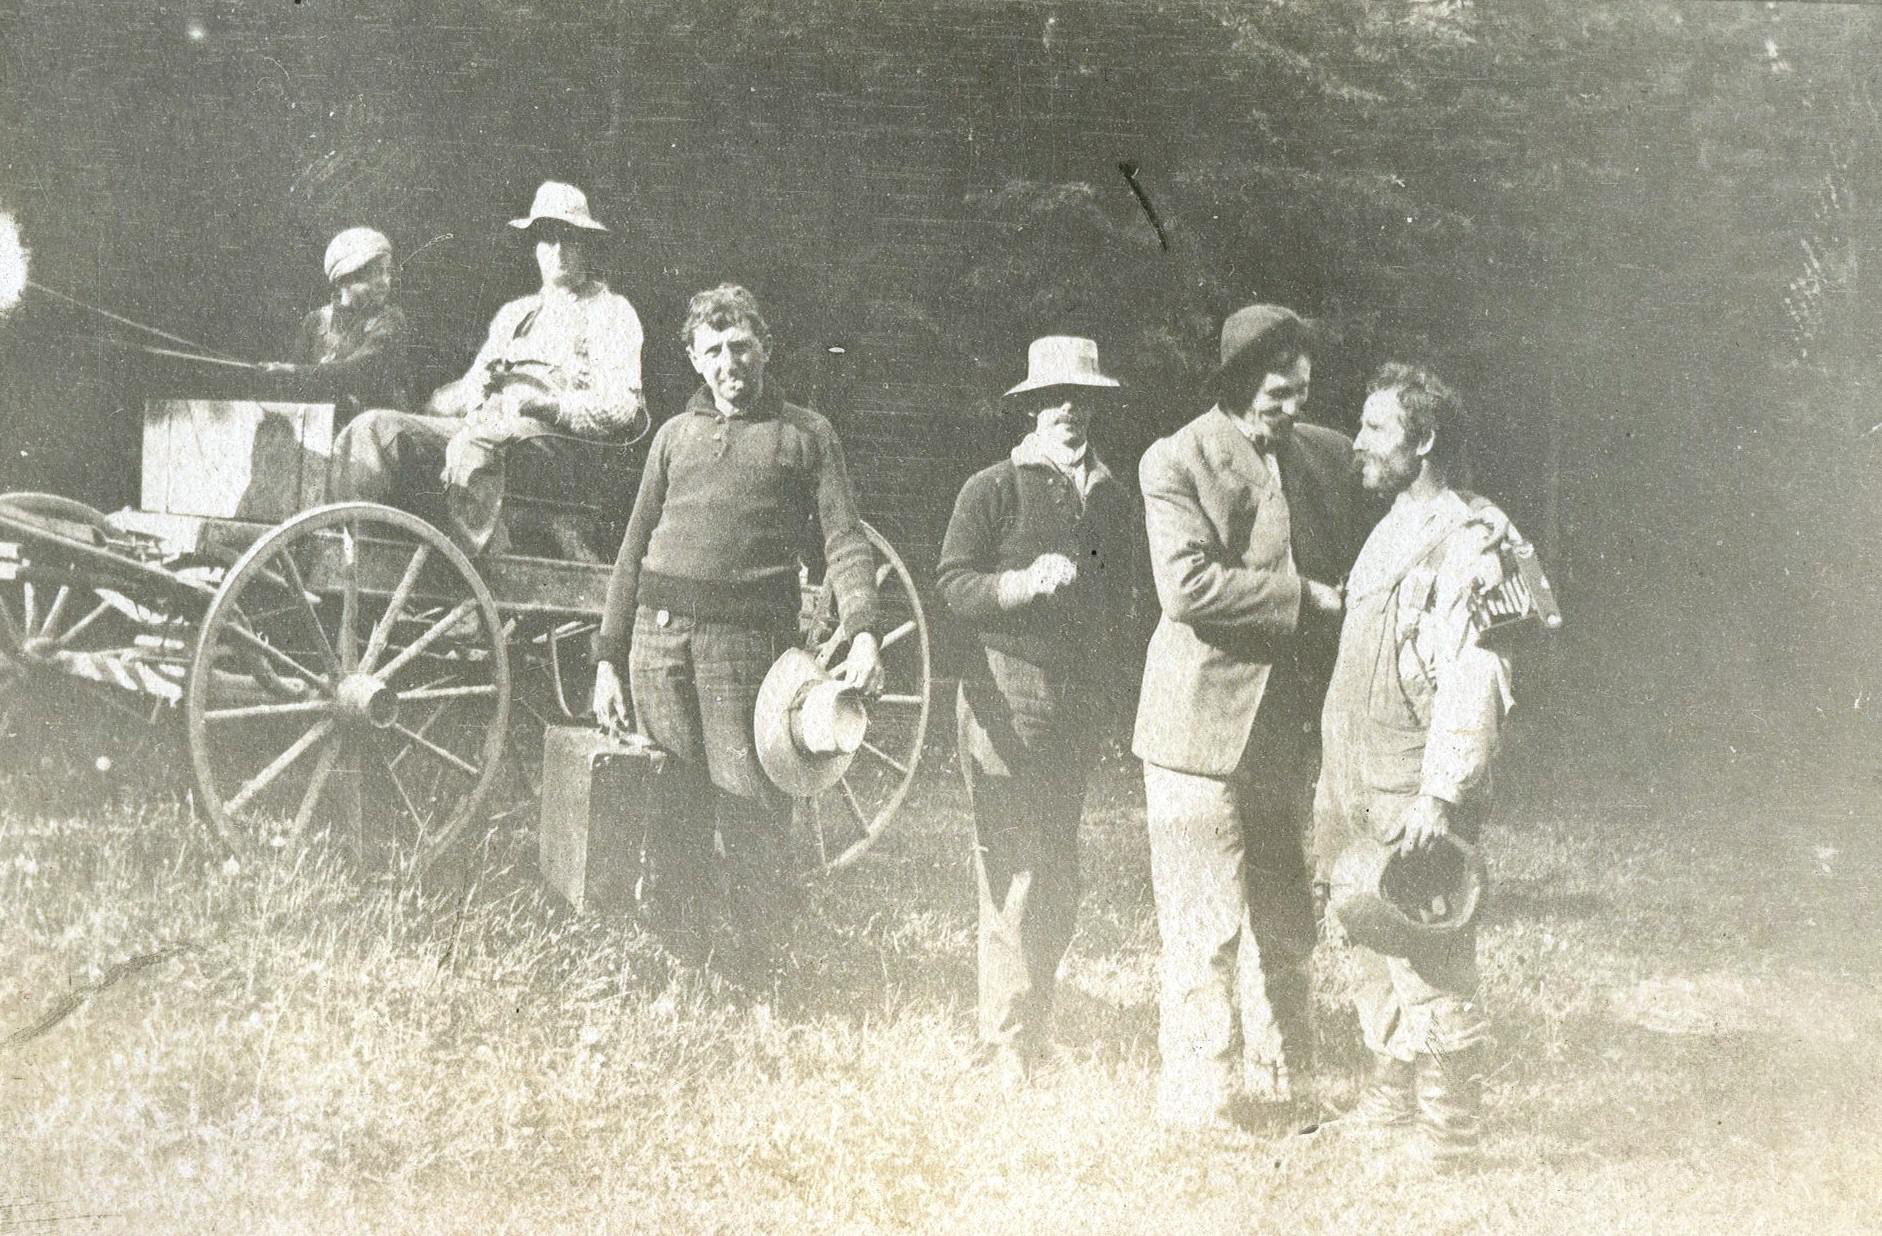 Men standing near a horse-drawn carriage meet a man in working clothes.